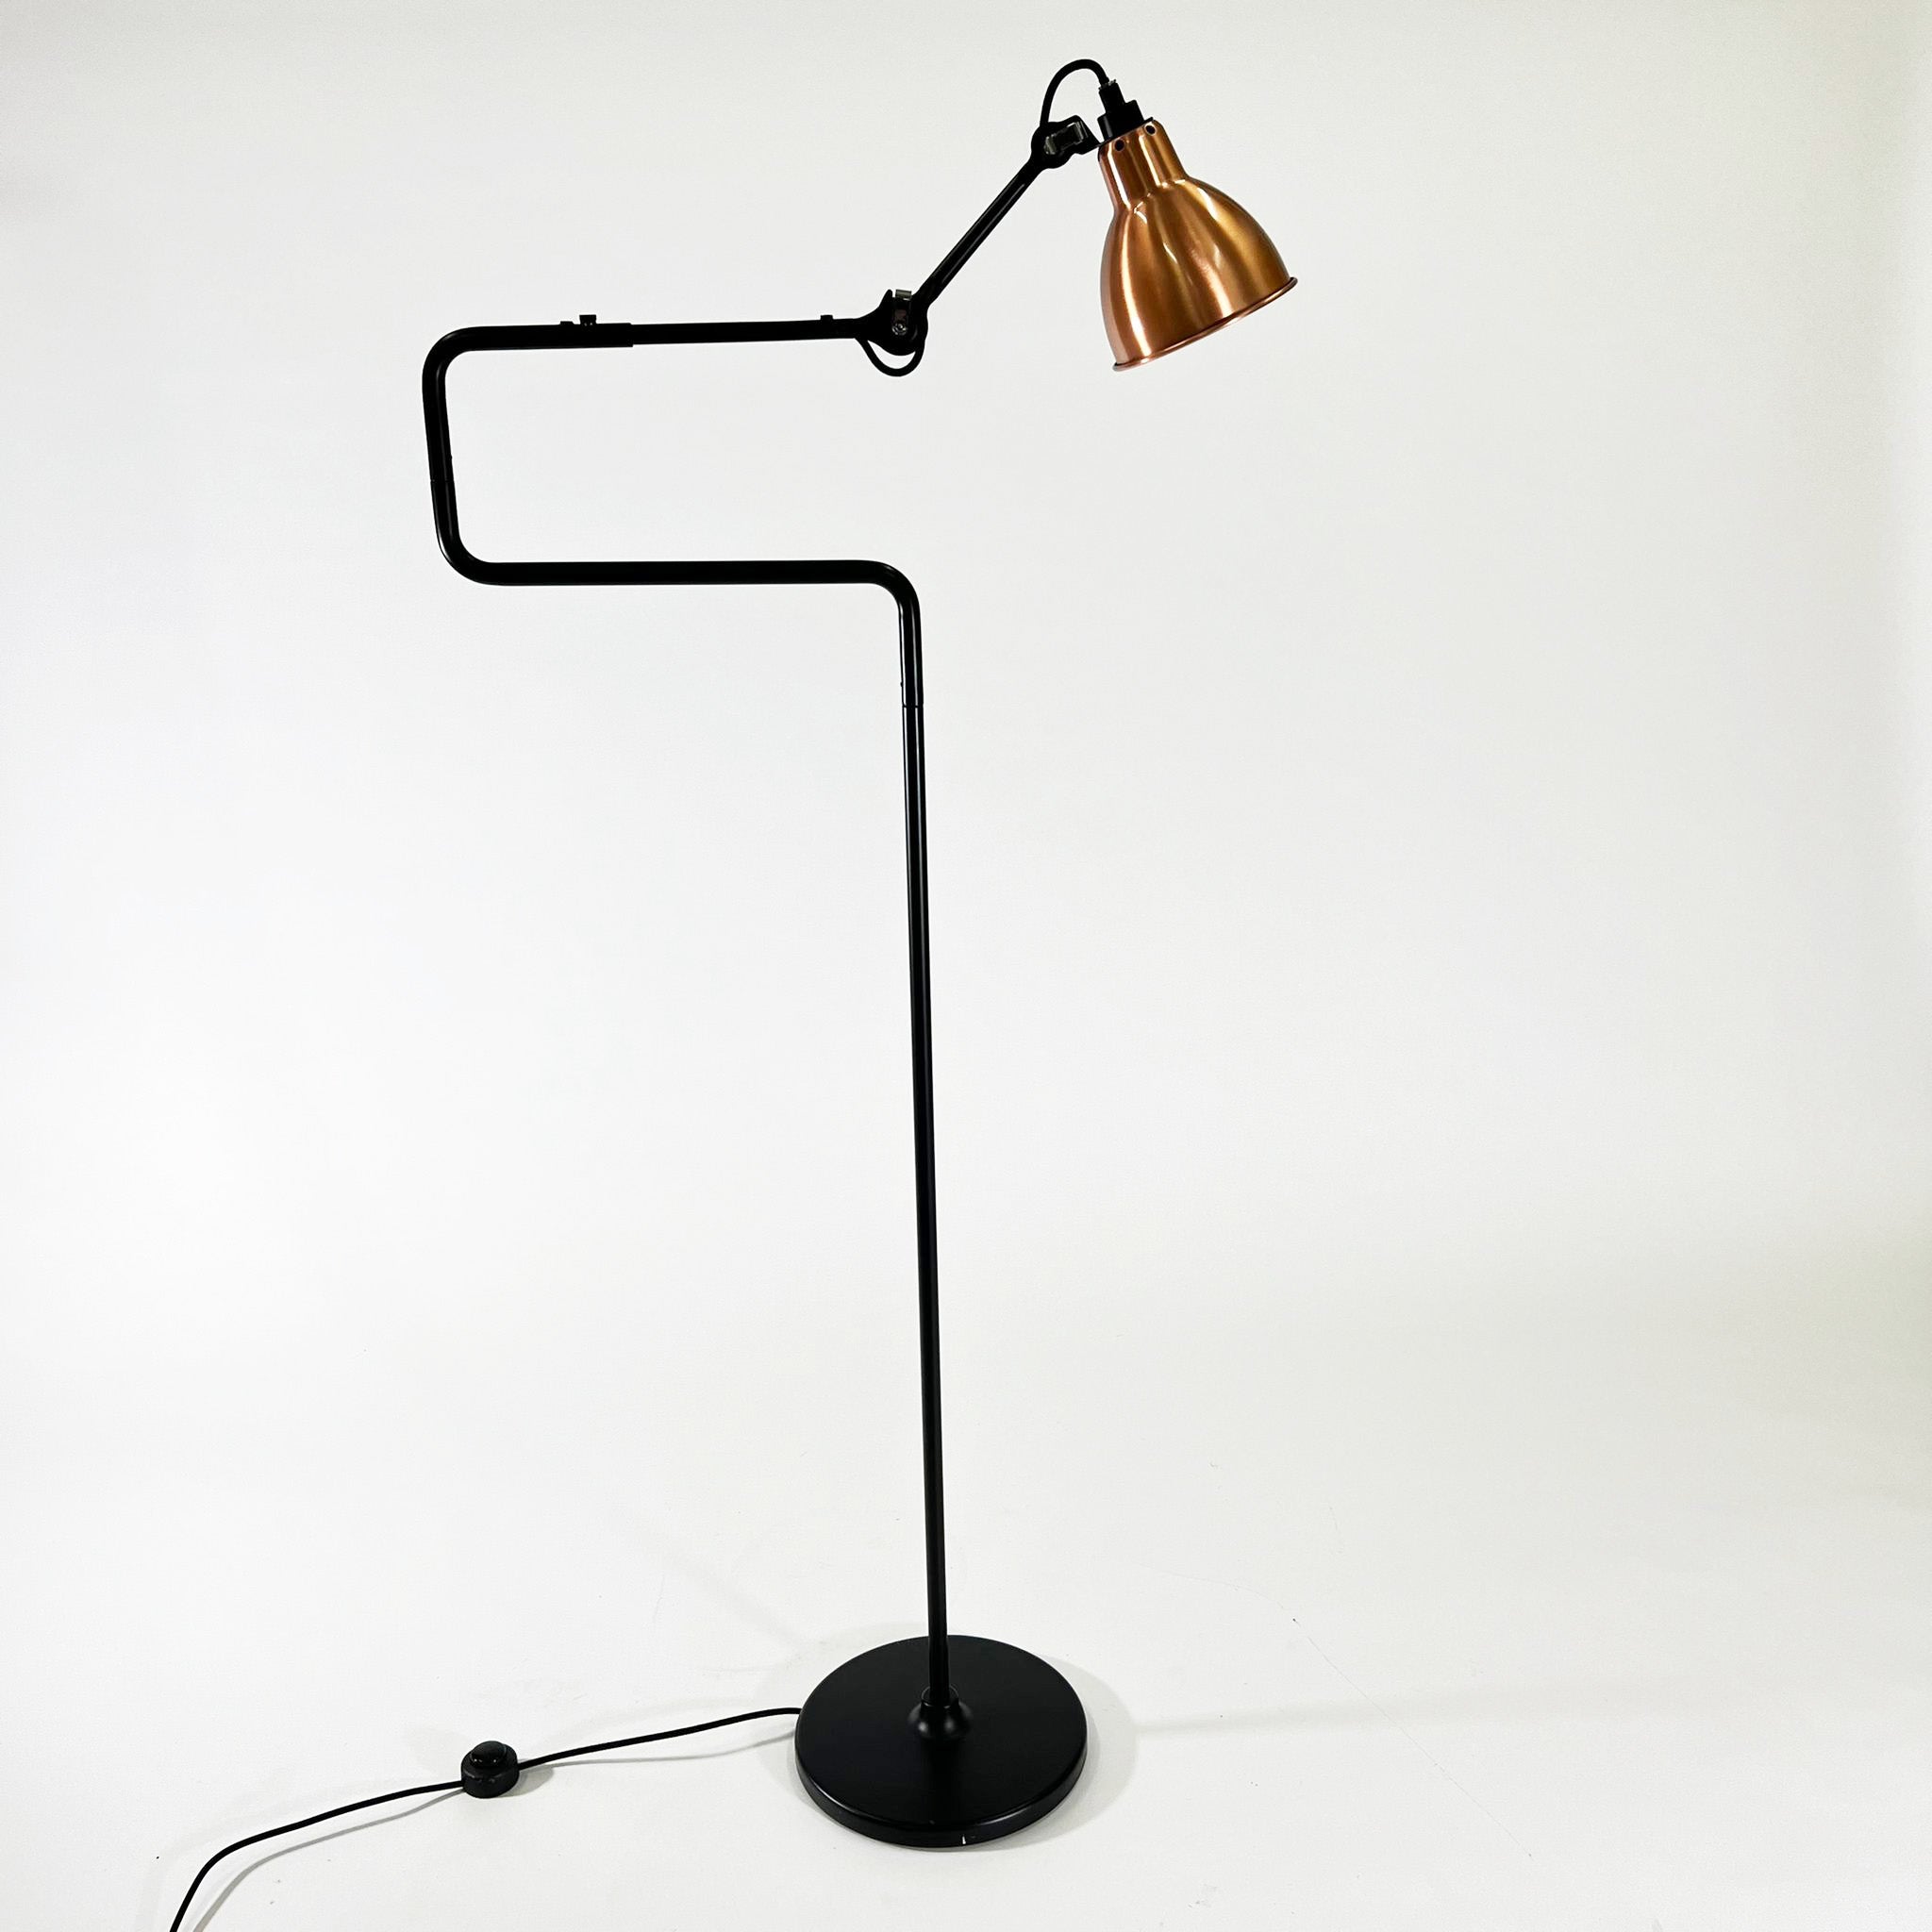 Clearance Lampe Gras N°411 Floor Lamp / Black with Copper Shade by La Lampe Gras